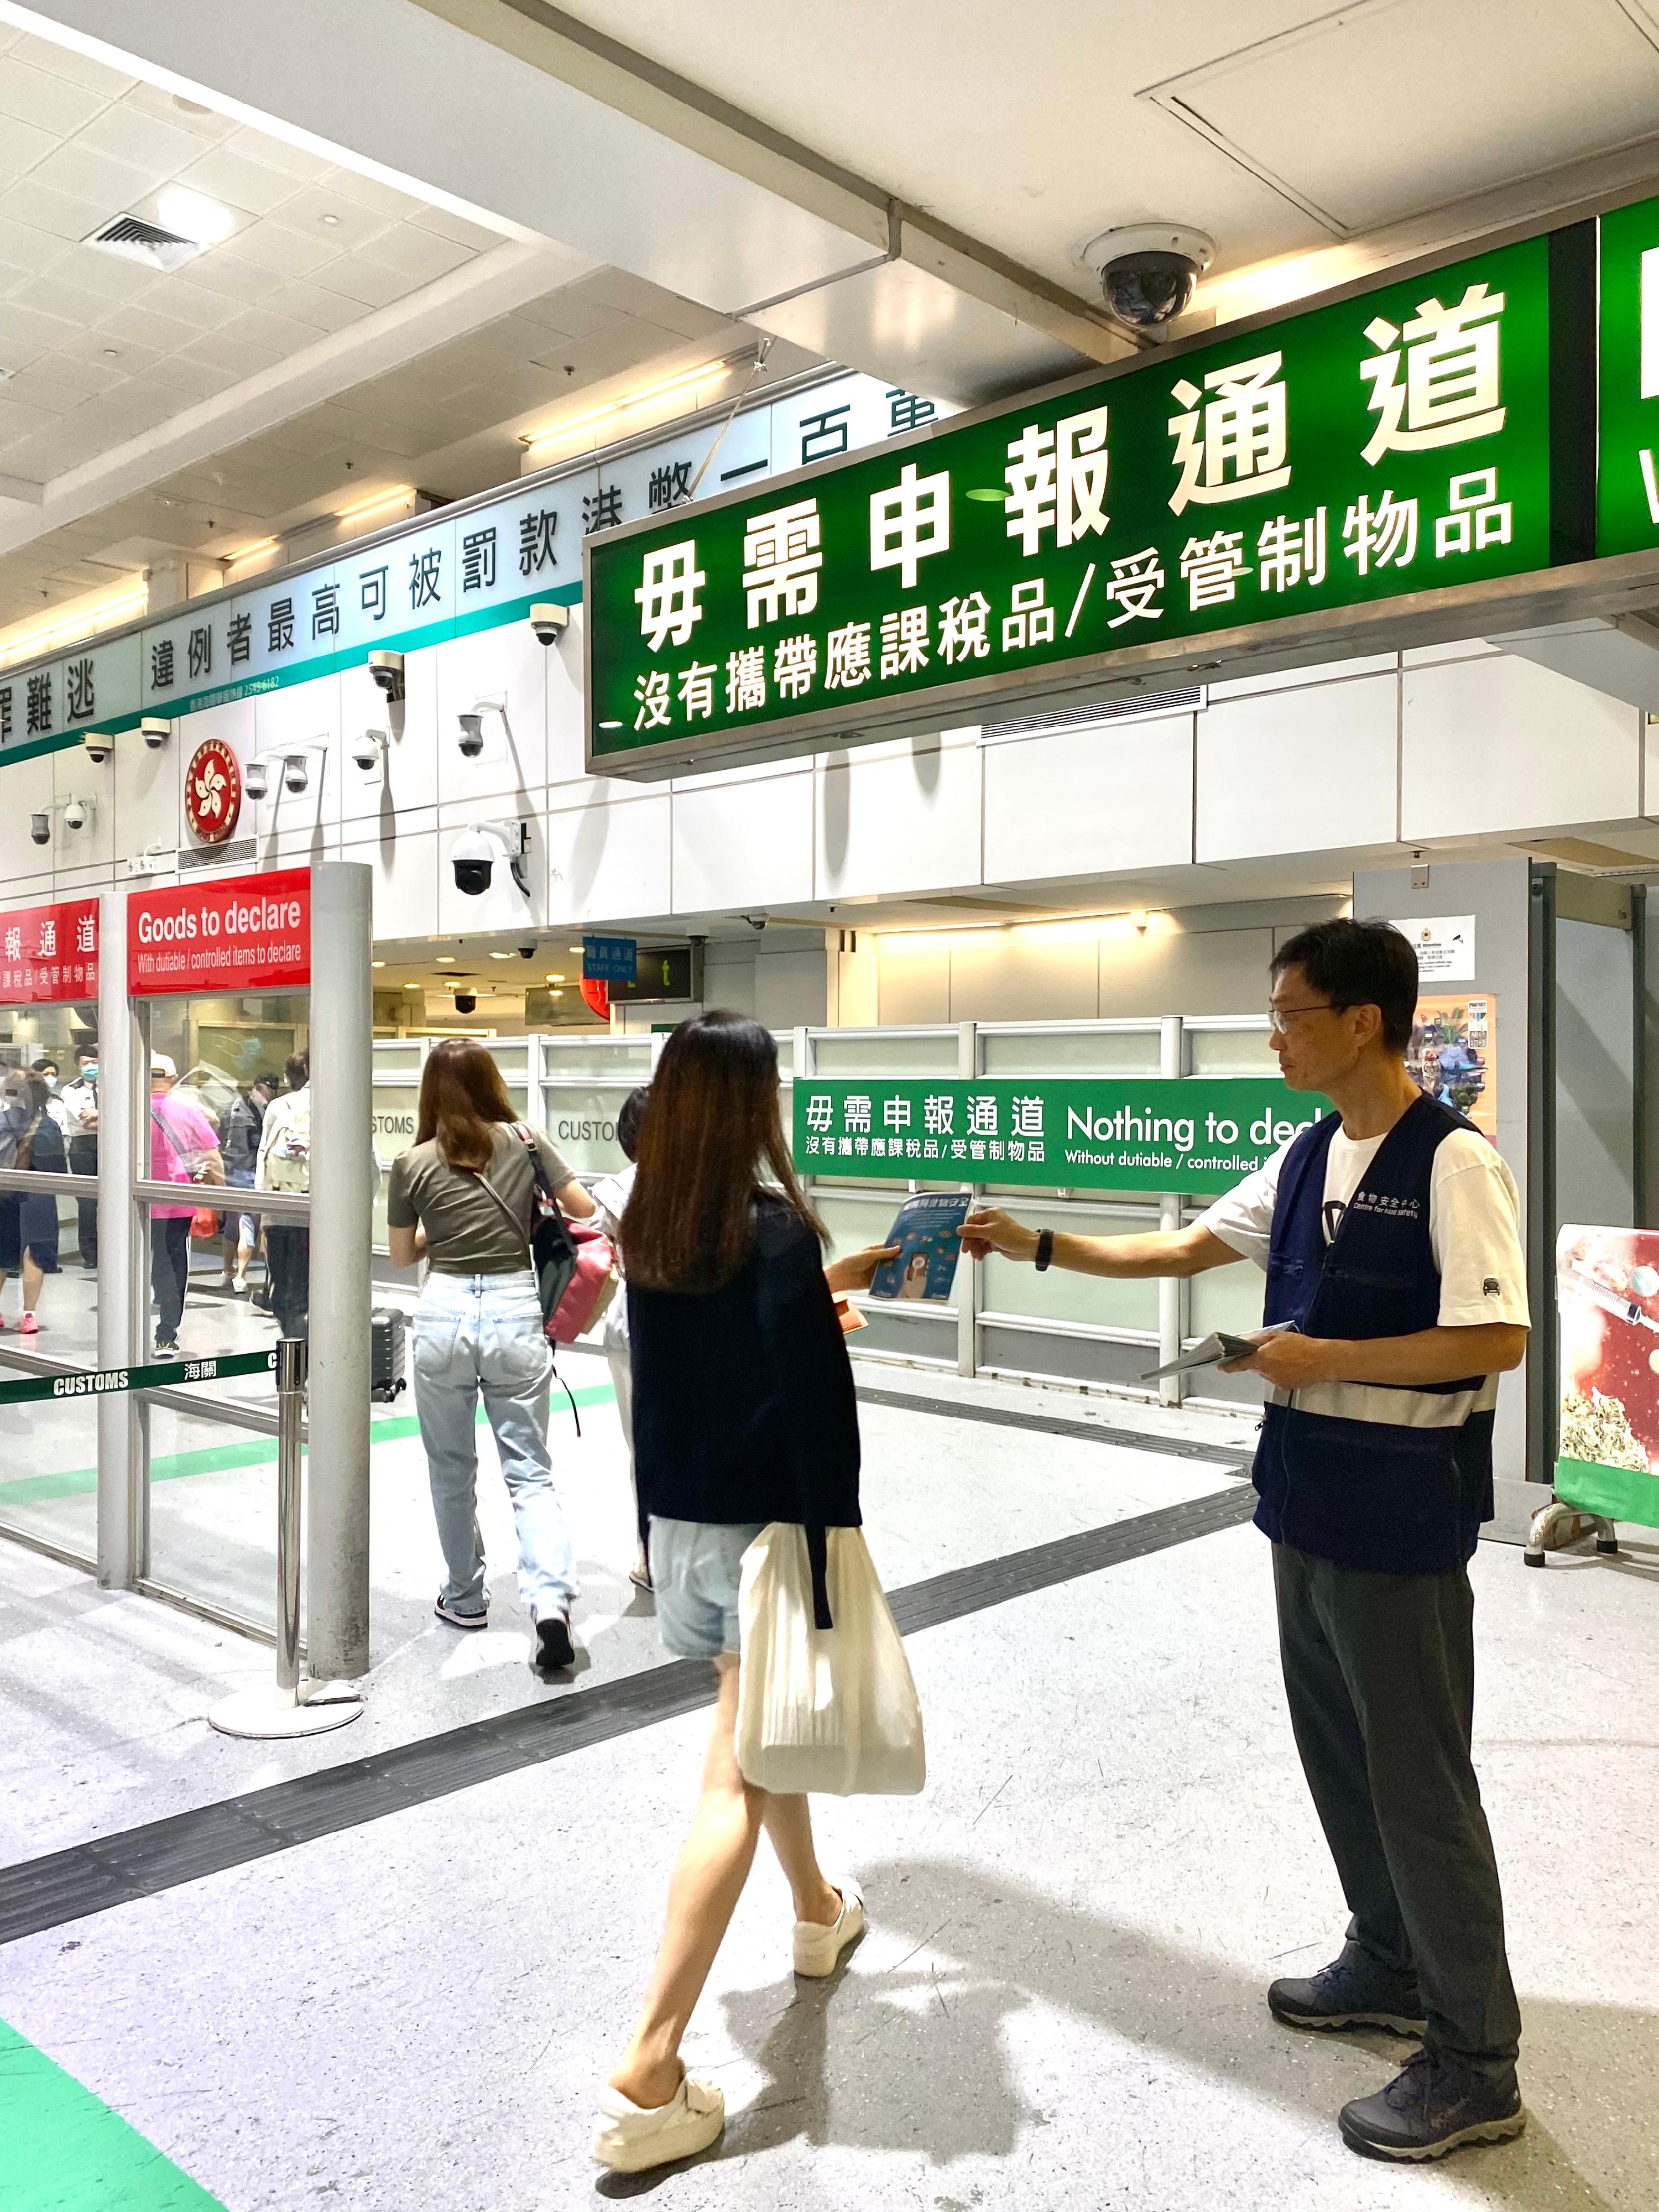 The Centre for Food Safety of the Food and Environmental Hygiene Department and Hong Kong Customs today (March 24) stepped up publicity and education to remind members of the public of the risks associated with cross-boundary meals purchased from agents and delivered over long distance.